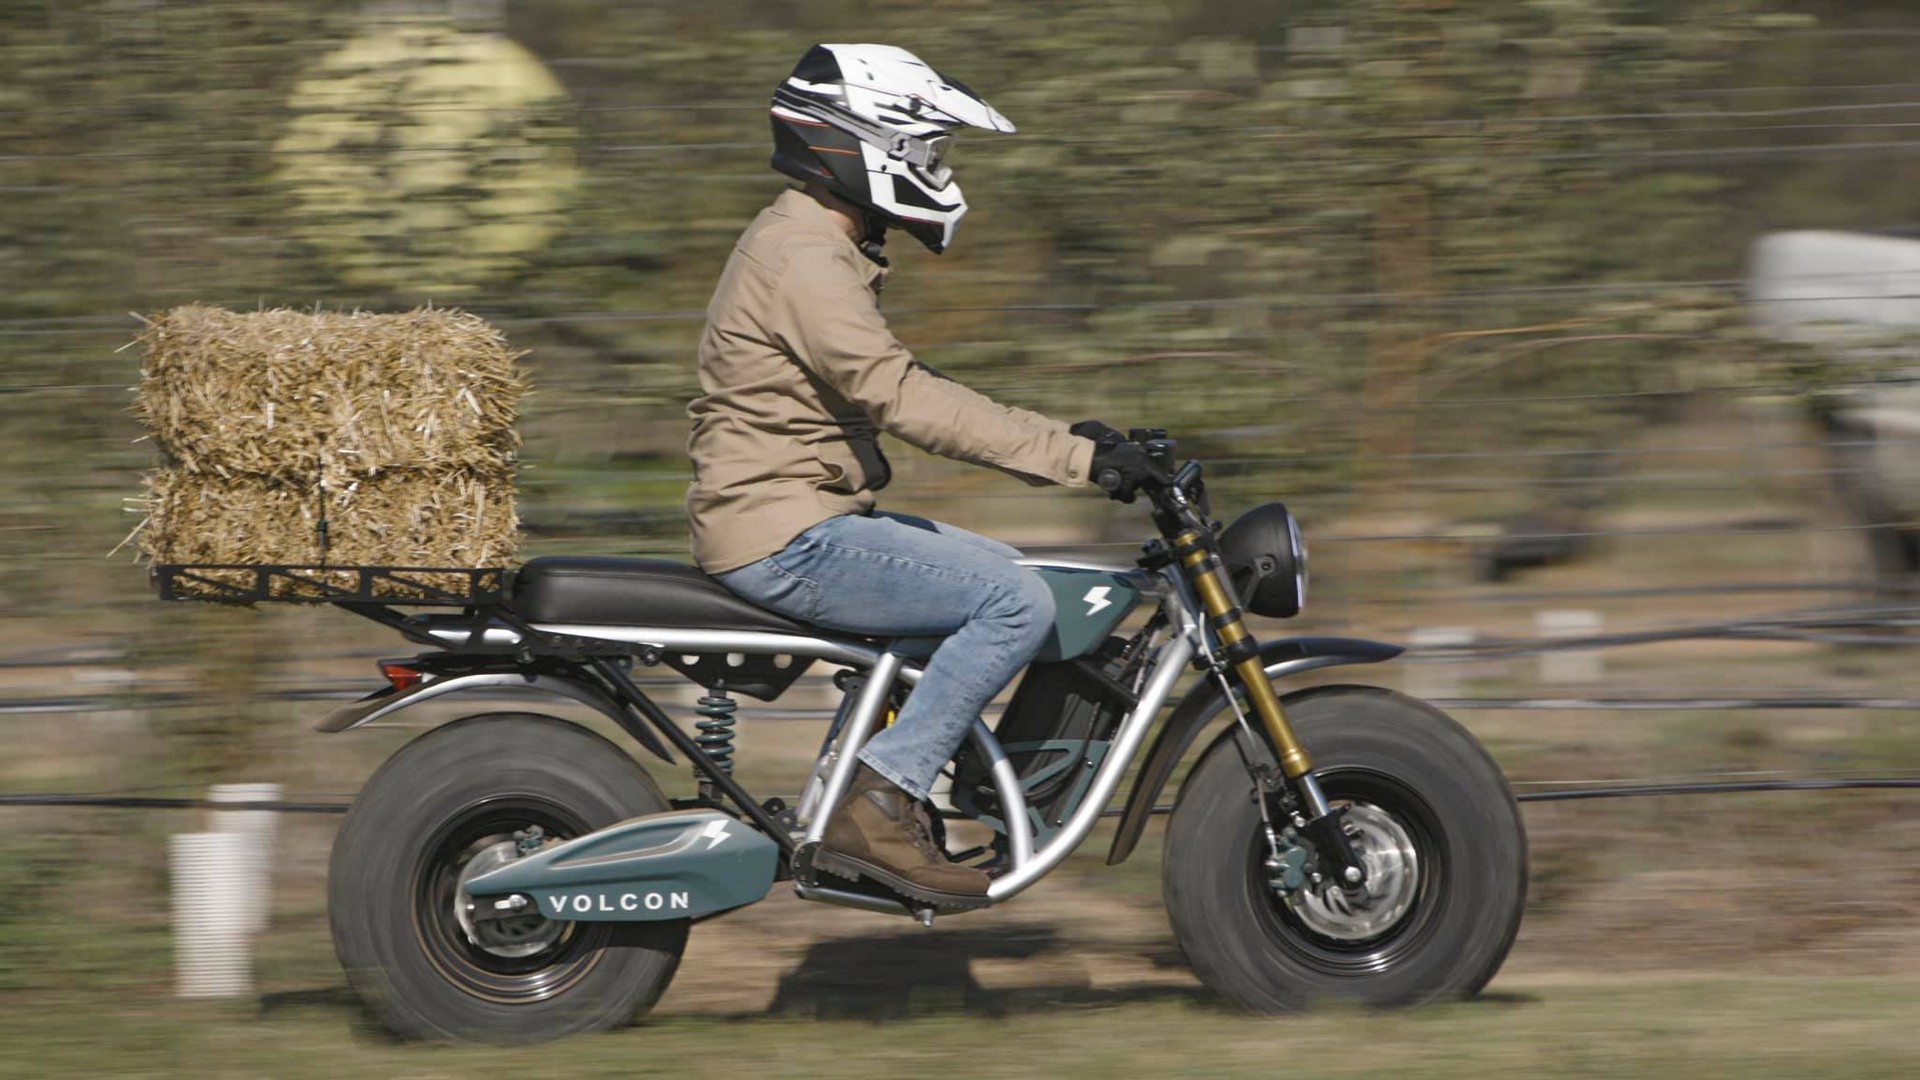 volcon-s-grunt-off-road-ev-bike-costs-6k-stag-and-beast-eutvs-also-get-priced_15.jpg